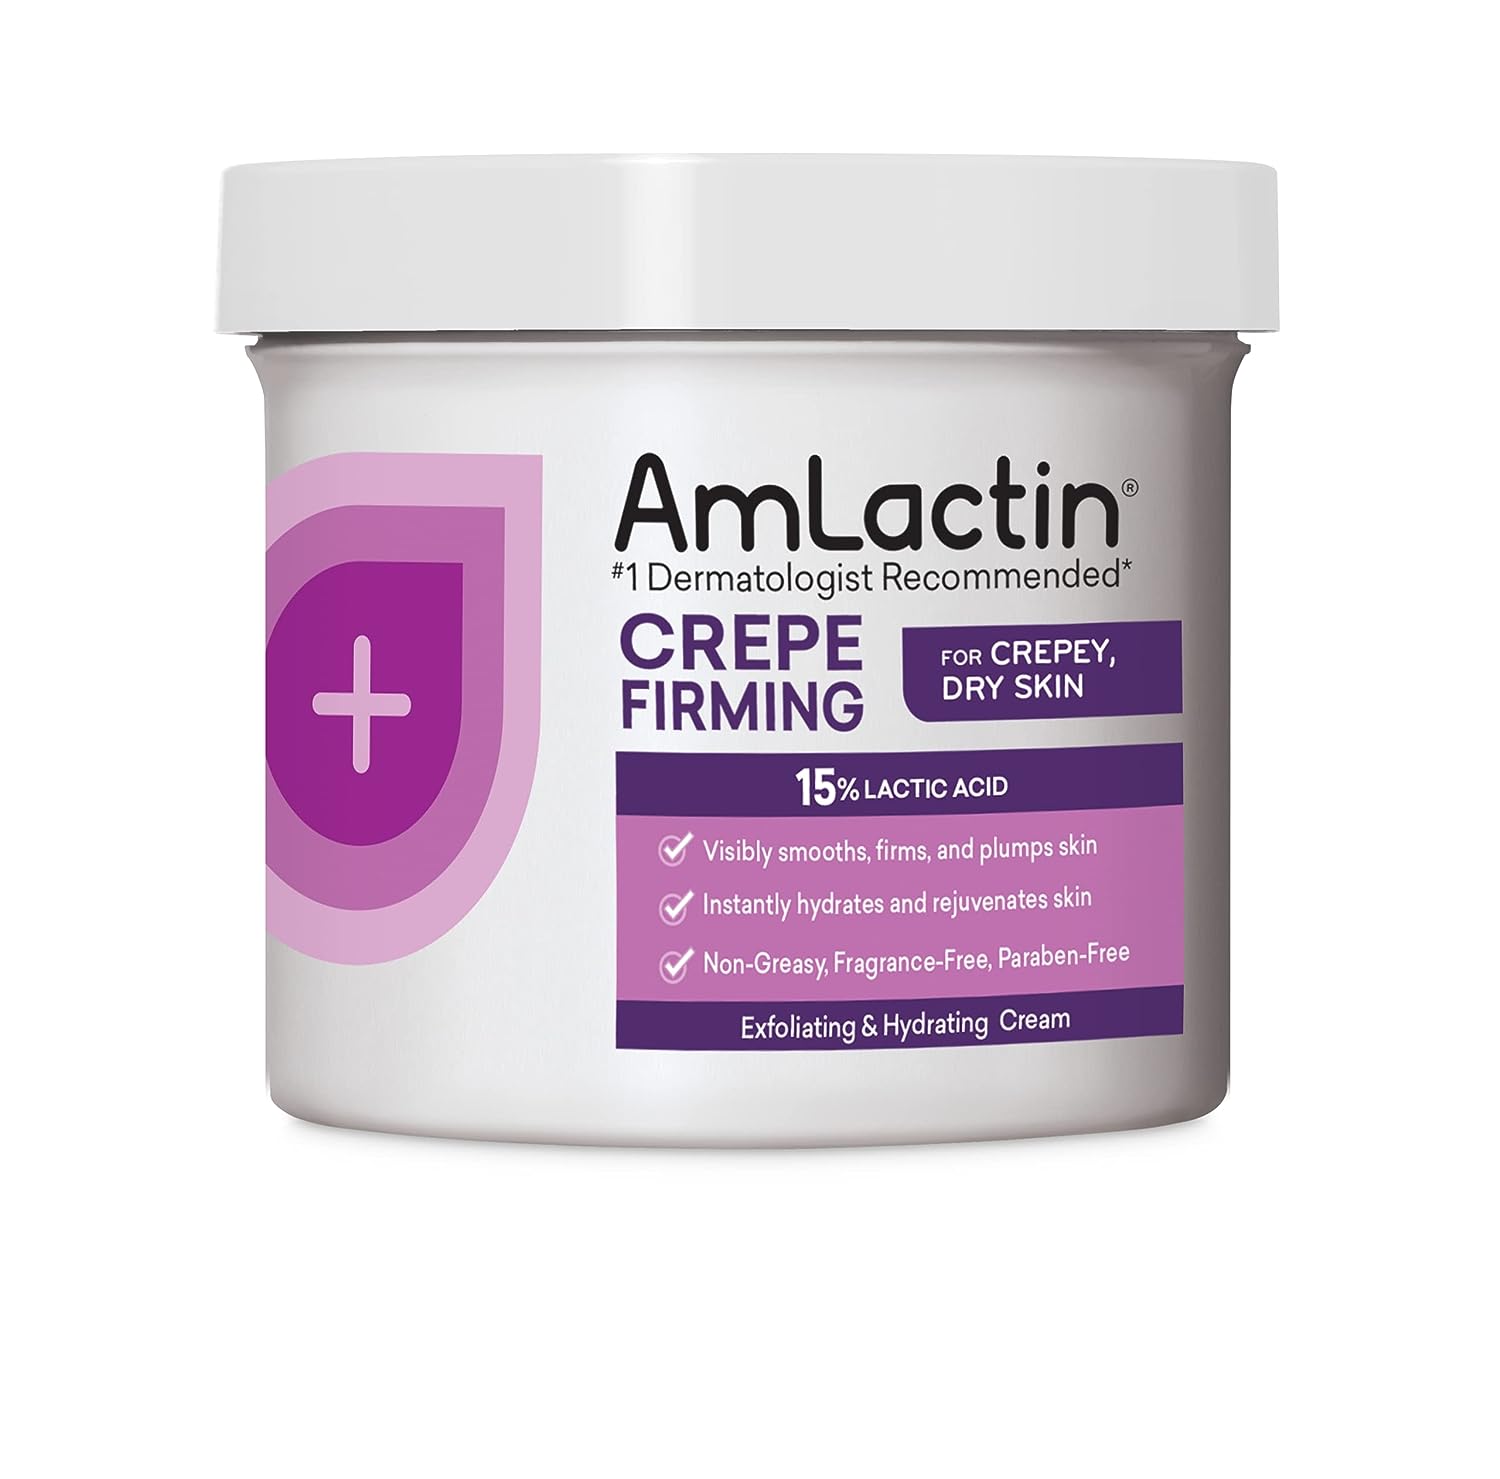 AmLactin Crepe Firming Cream - 12 oz Body Cream with 15% Lactic Acid - Exfoliator and Moisturizer for Crepey, Dry Skin?